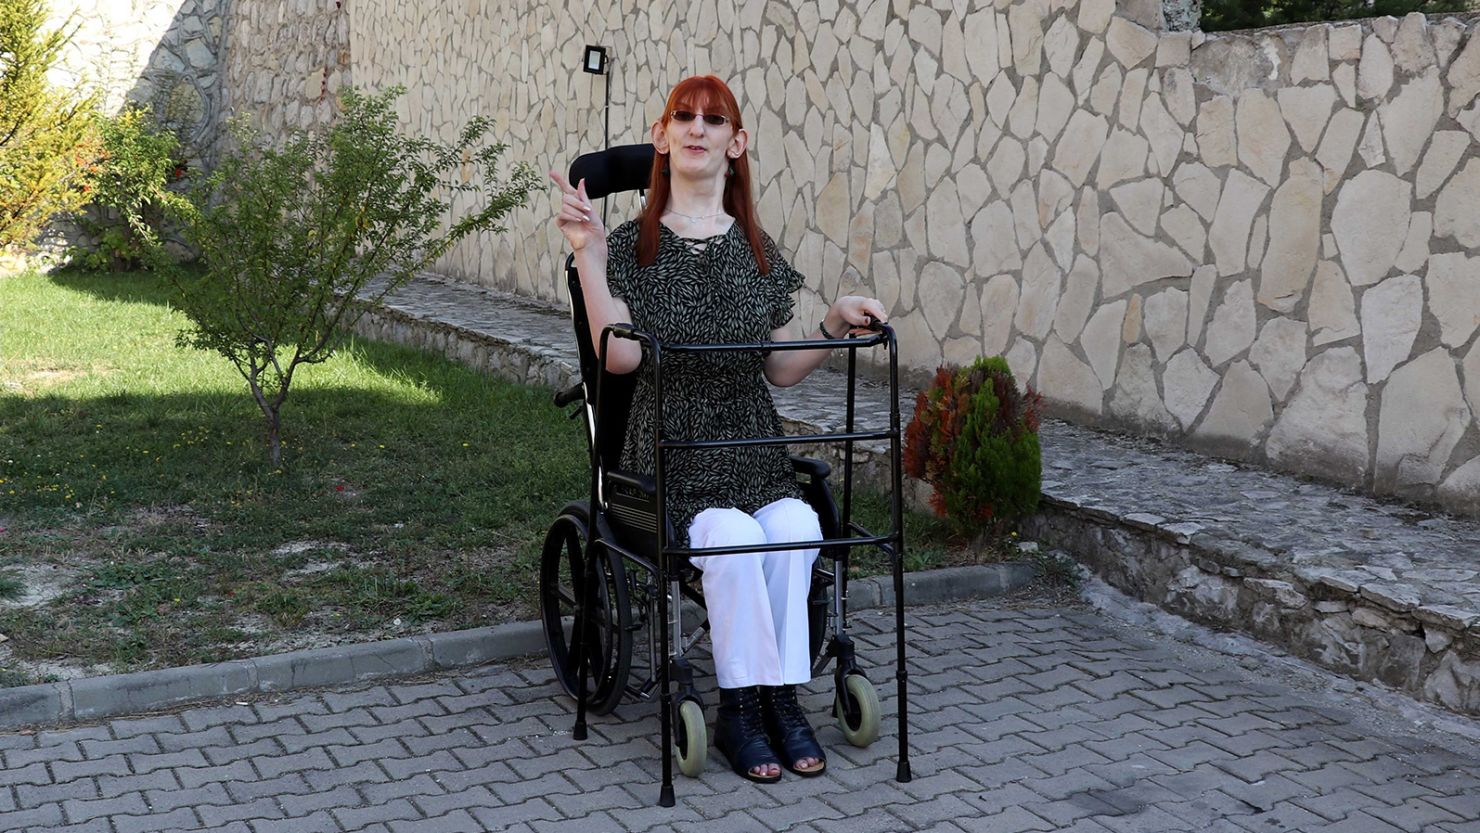 Rumeysa Gelgi, who stands 7 feet, 0.7 inches tall and has been confirmed as the world's tallest living woman by Guinness World Records, is seen in front of her house in Karabuk, Turkey, on October 14, 2021. 